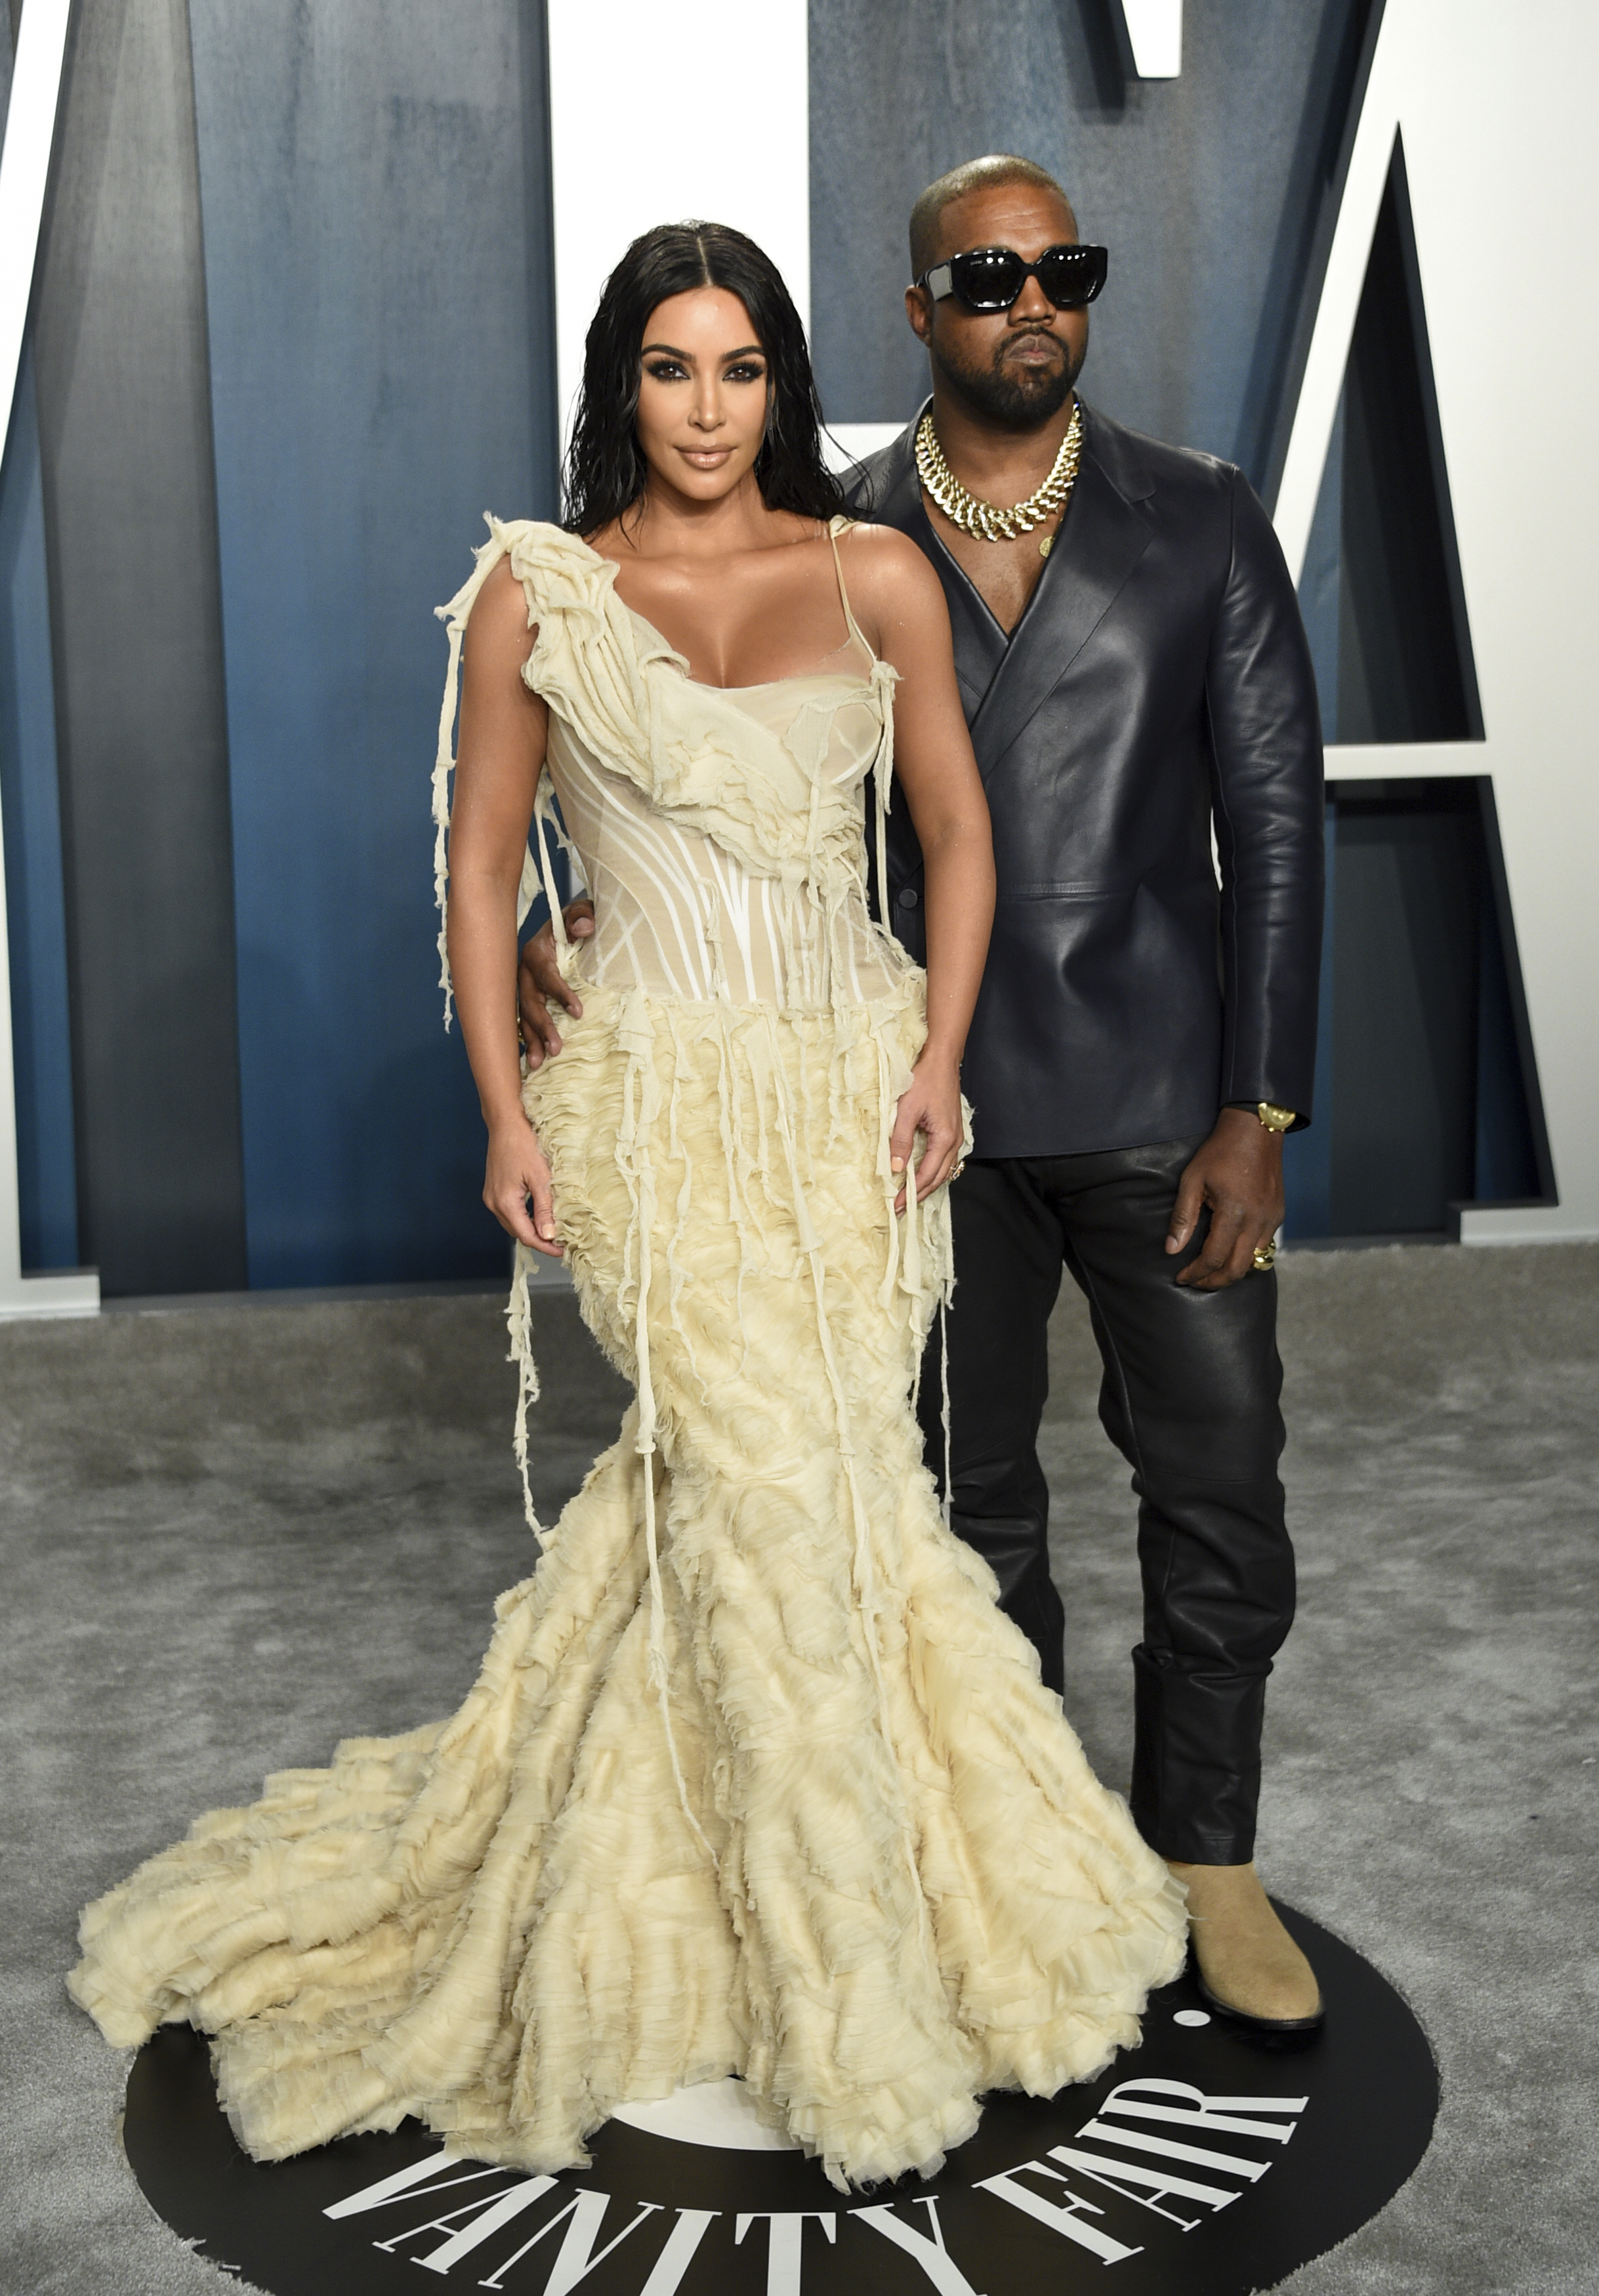 Kim Kardashian West, left, and Kanye West arrive at the Vanity Fair Oscar Party on Sunday, Feb. 9, 2020, in Beverly Hills, Calif. (Photo by Evan Agostini/Invision/AP)